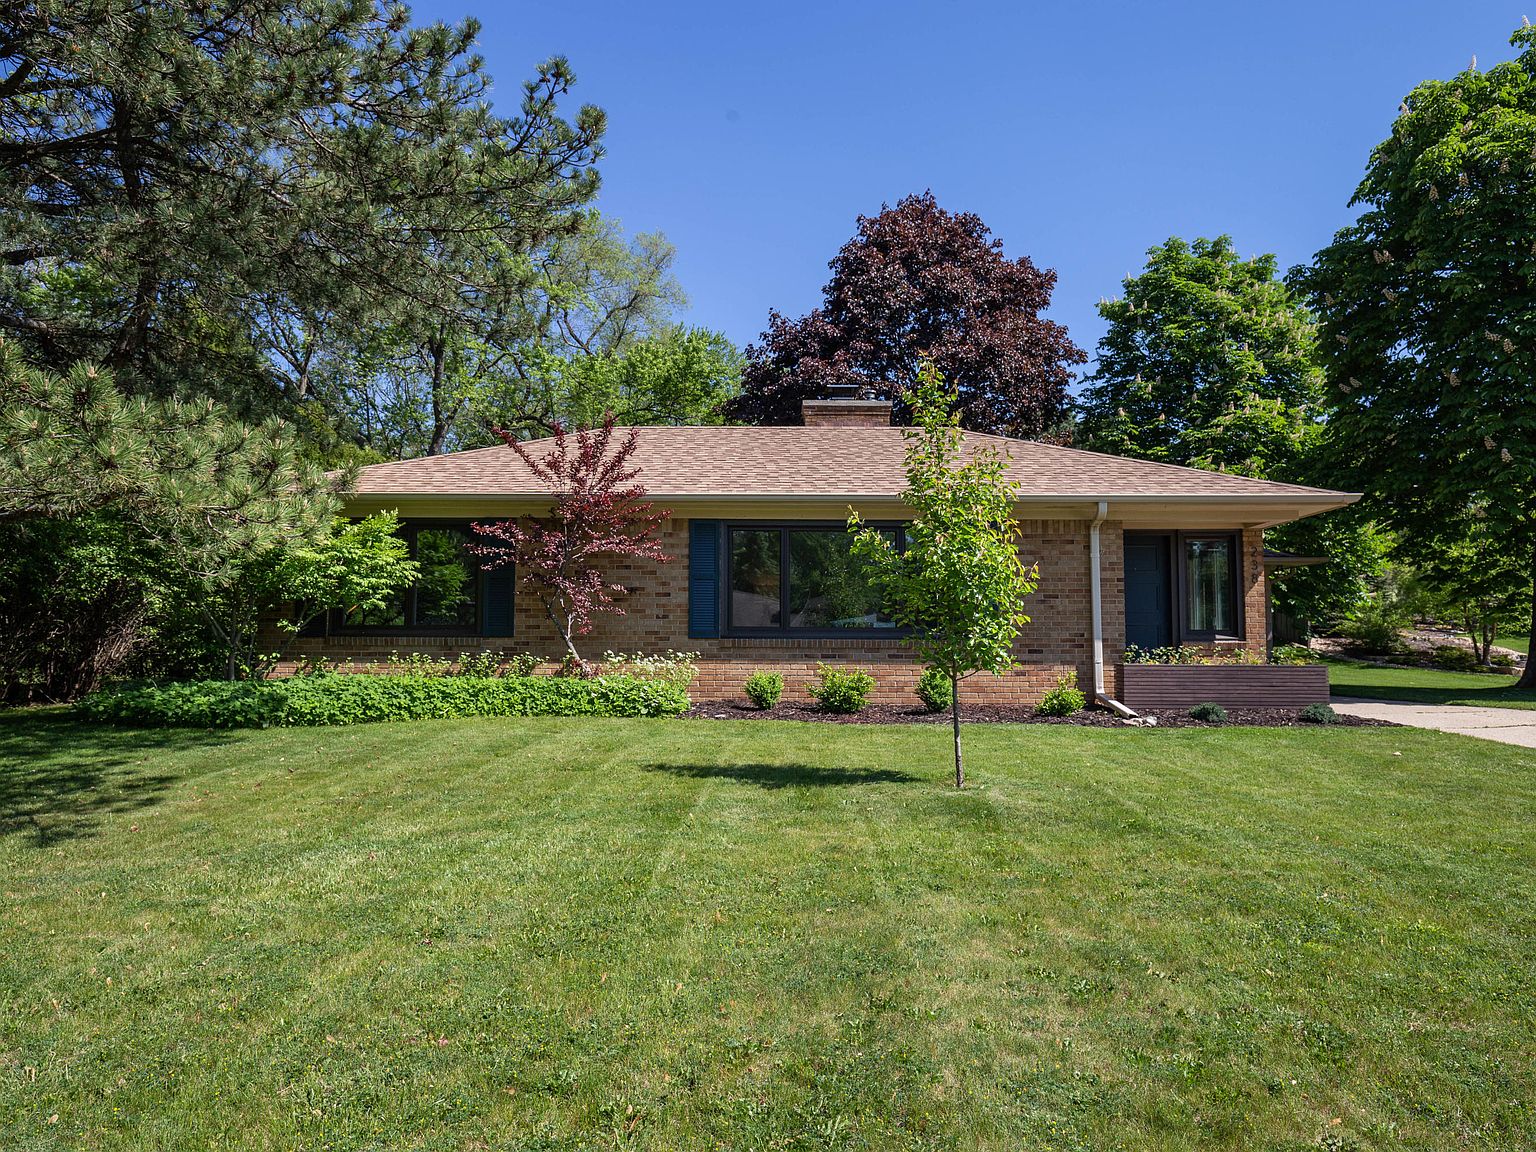 238 W Clovernook Ln, Glendale, WI 53217 Zillow